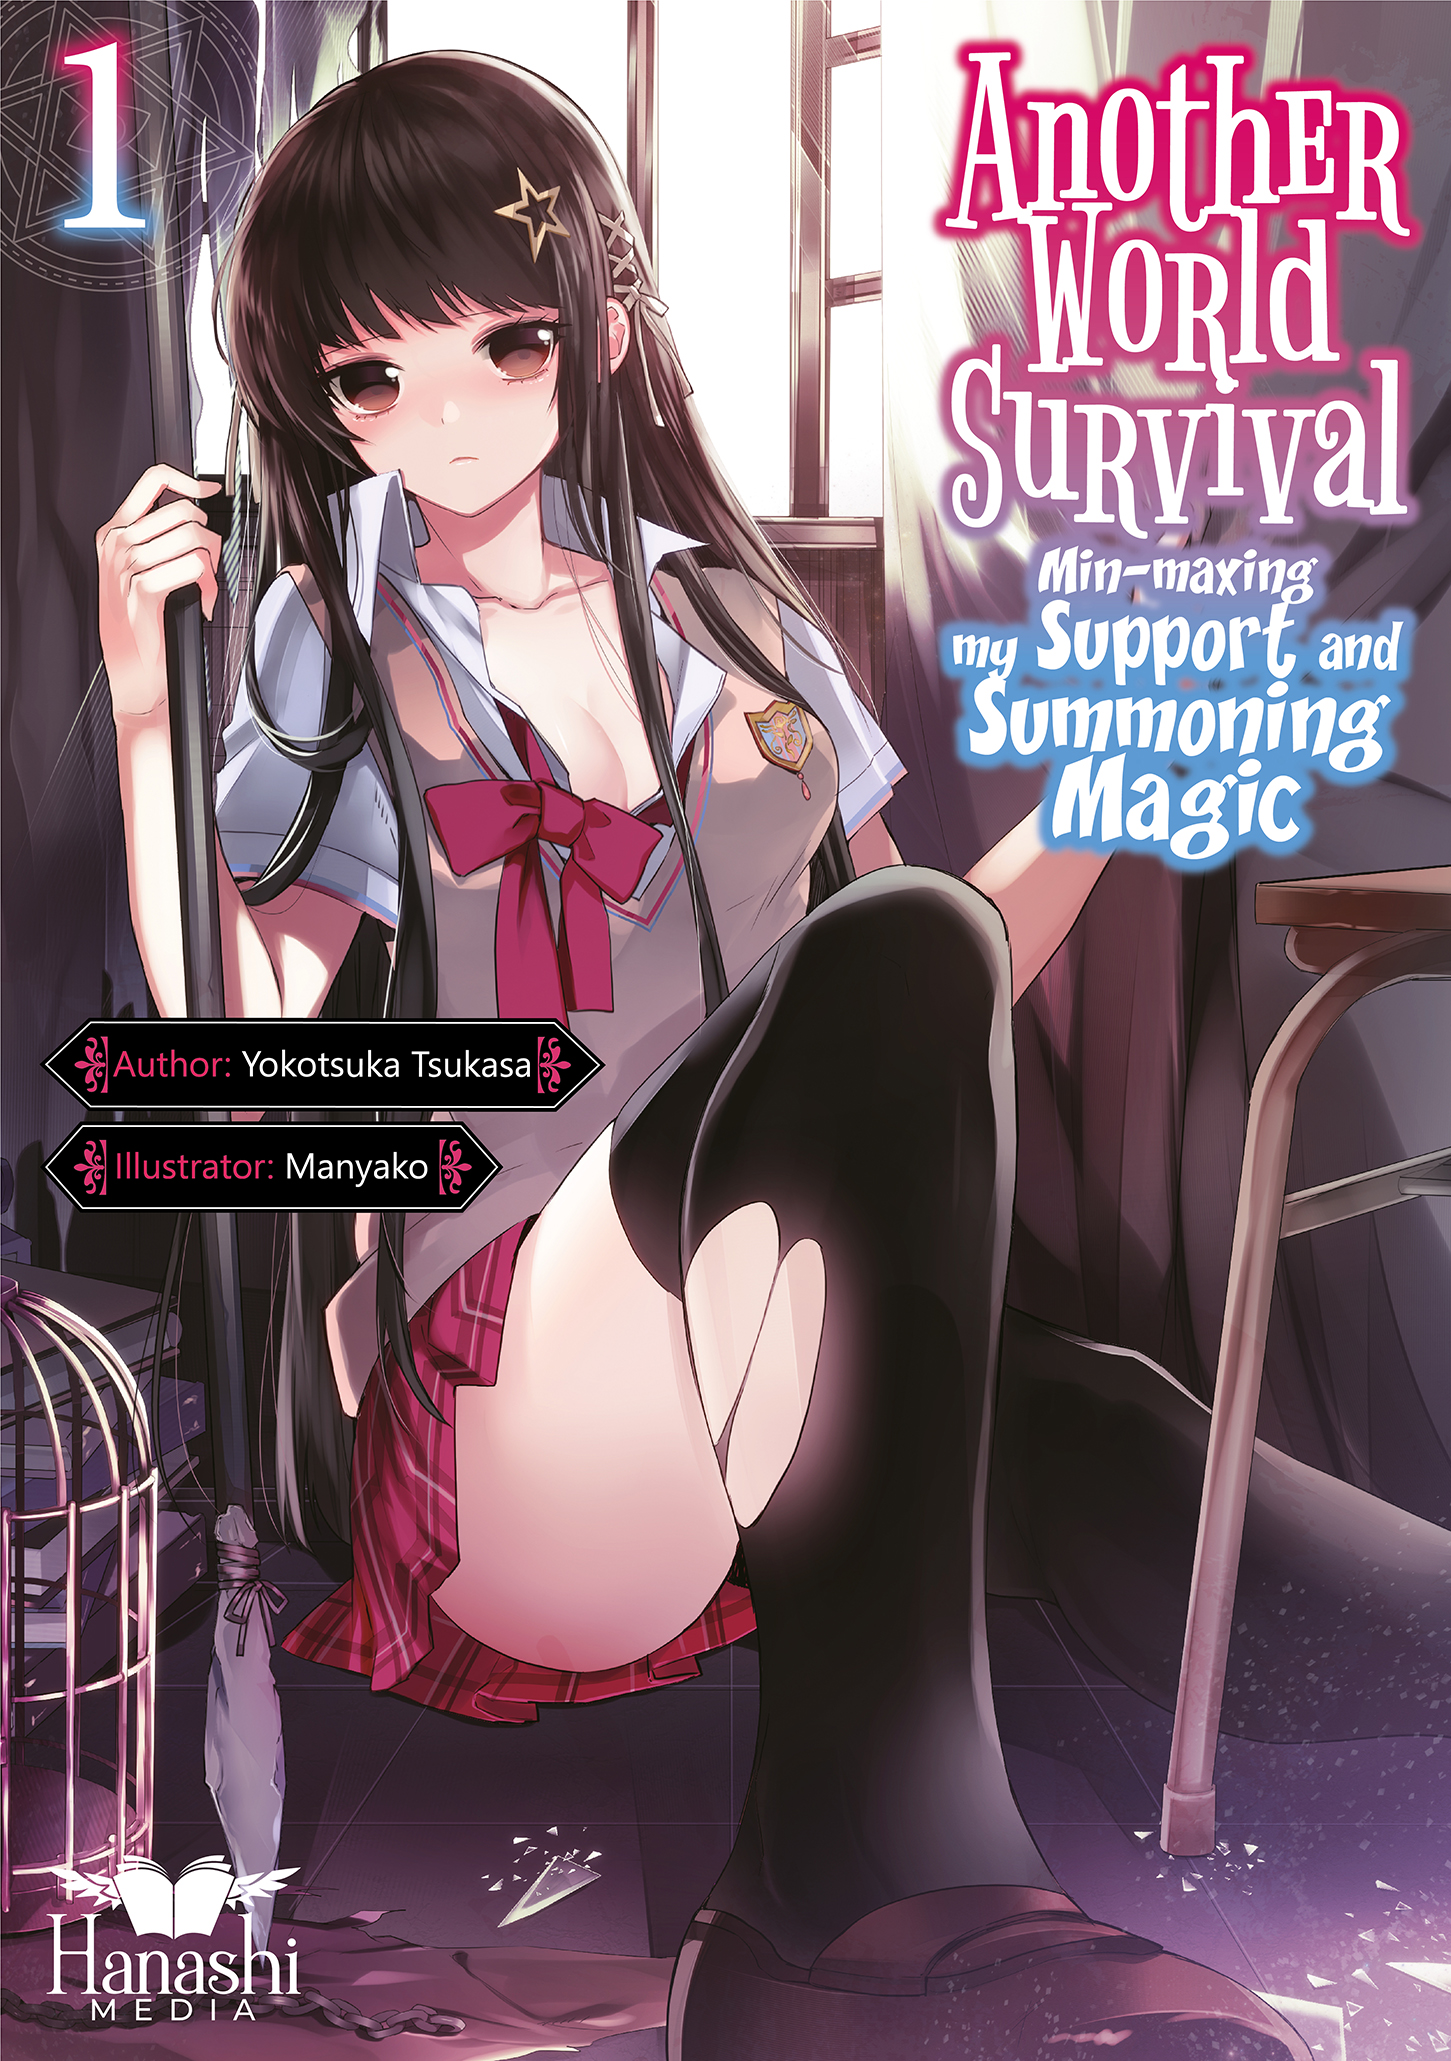 Cover des 1. Bandes zu Another World Survival